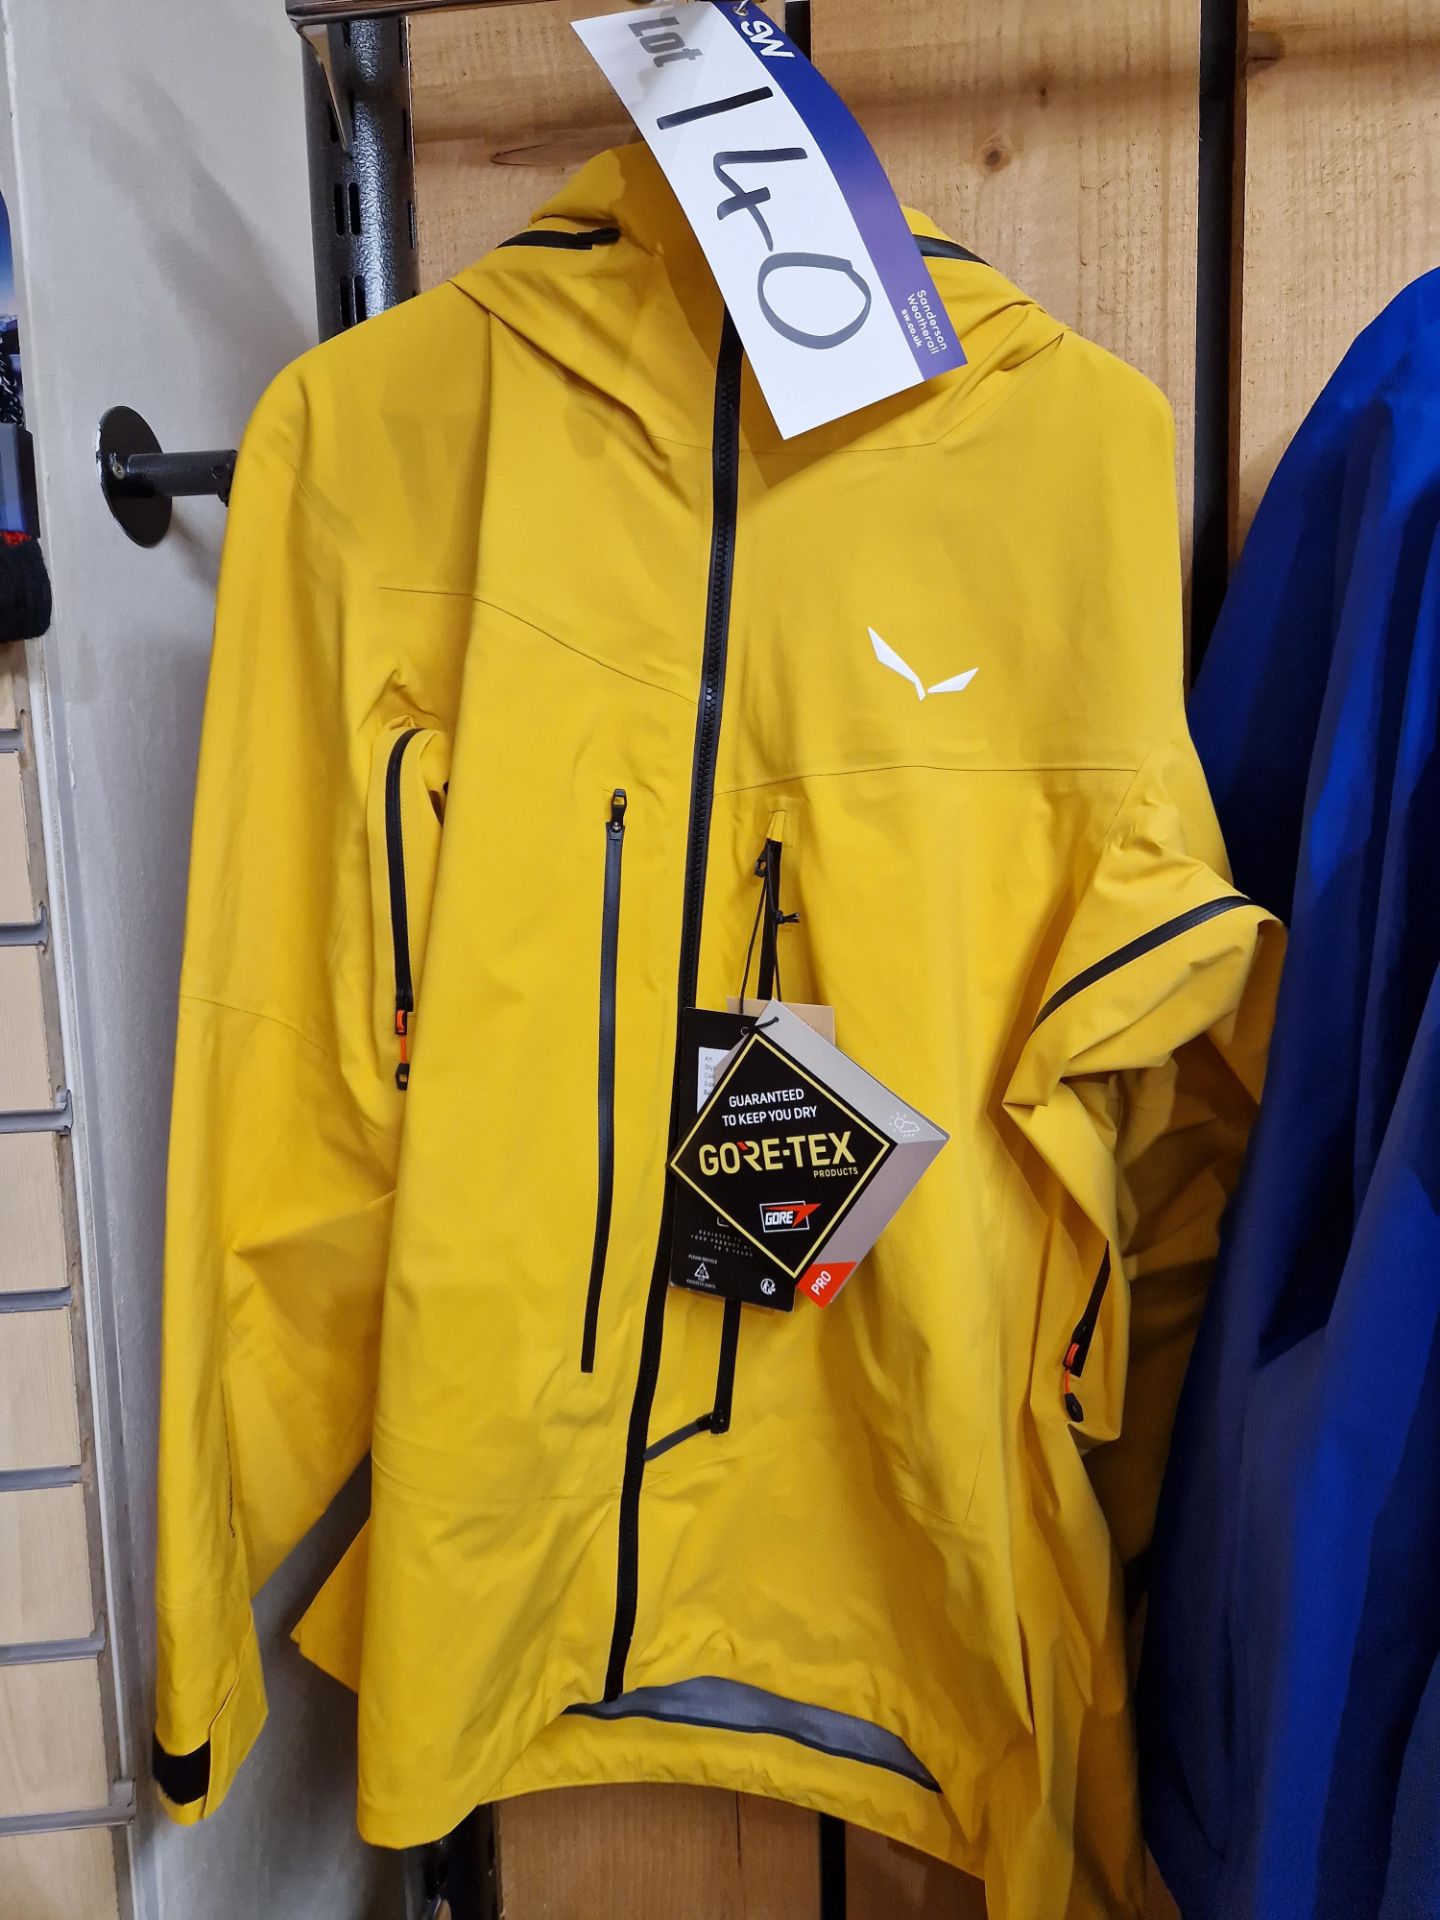 Salewa Ortles GTX Pro Stretch M Jacket, Colour: Gold, Size: 54/XXL Please read the following